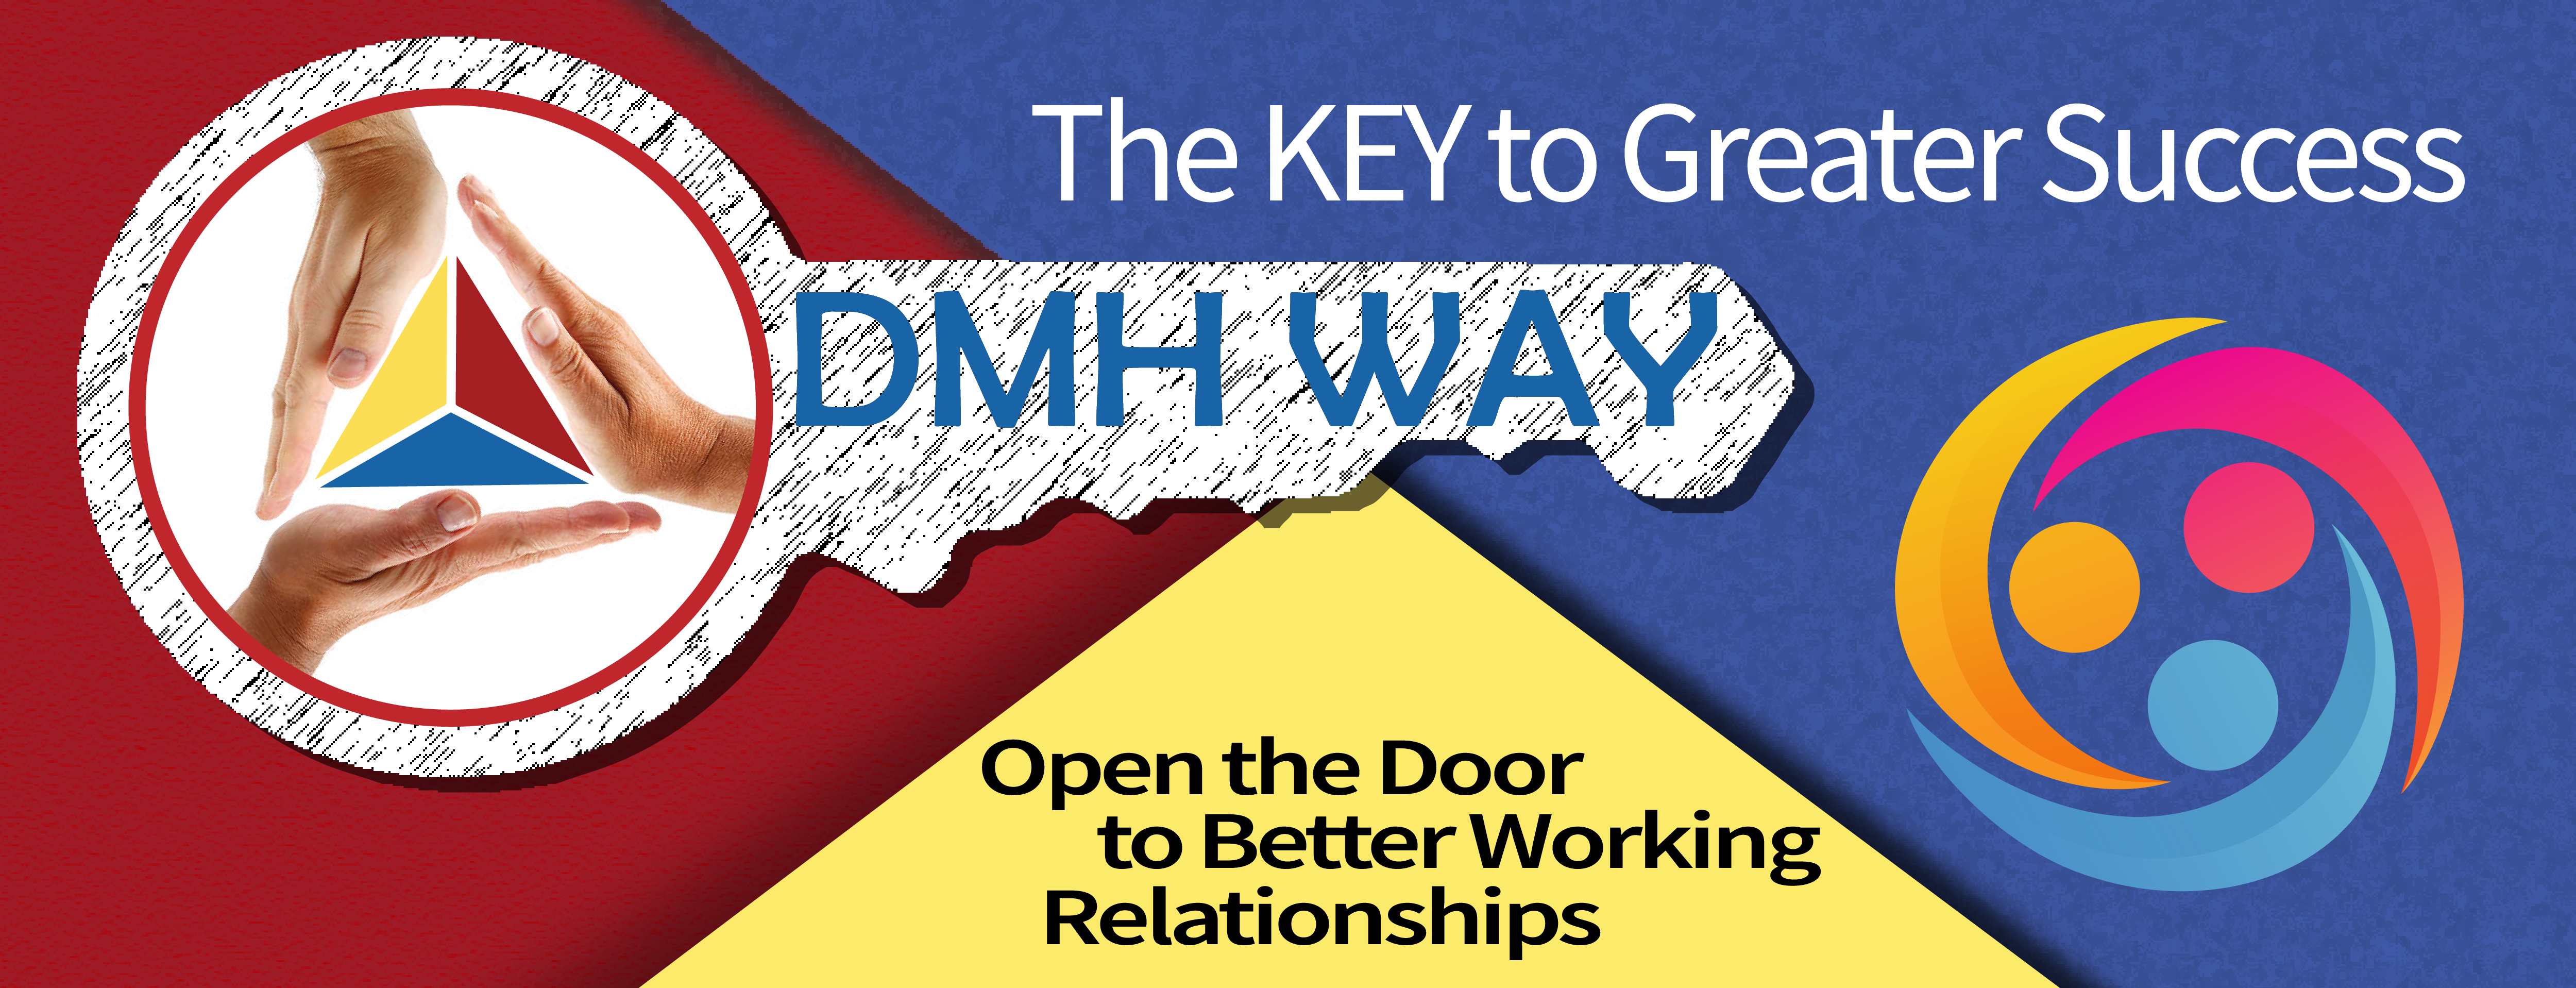 DMH Way: The Key to Greater Success banner